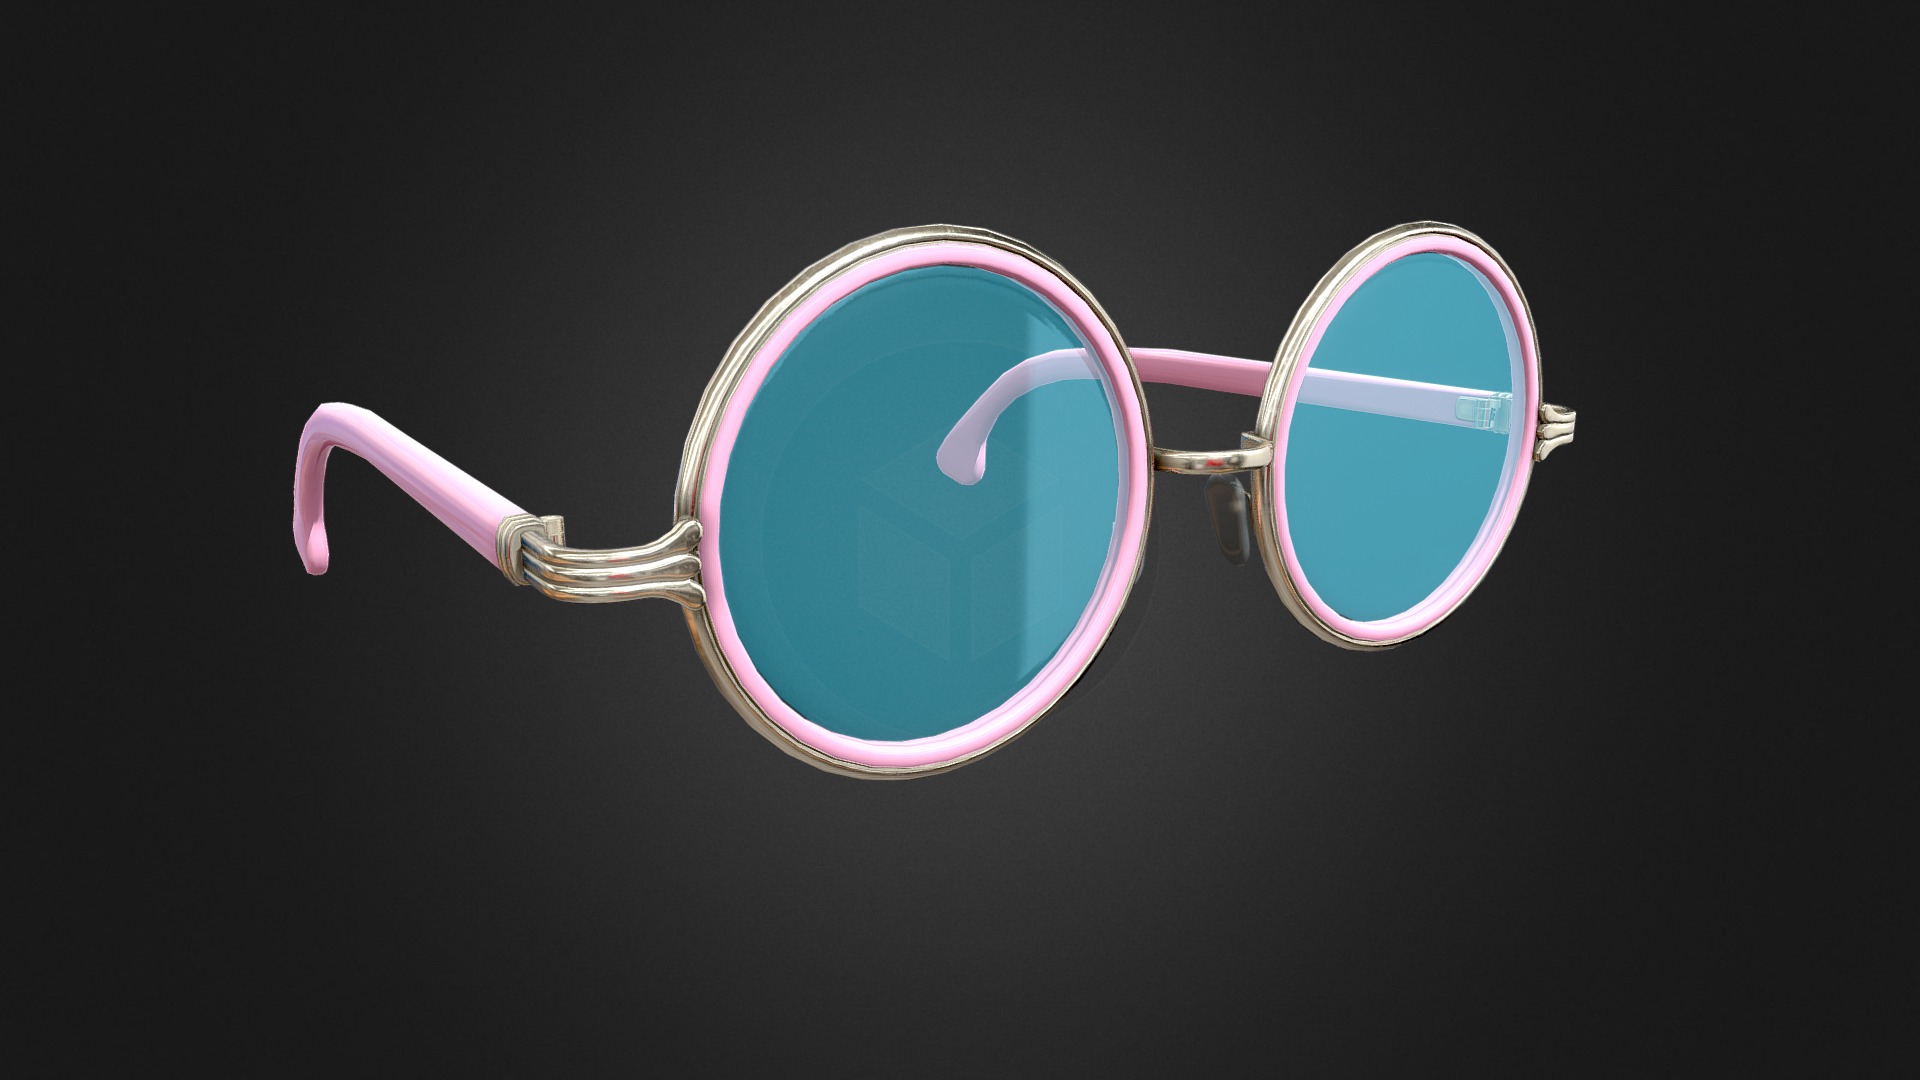 3D model Glasses Metal Frame Retro Classic Vintage Pink - This is a 3D model of the Glasses Metal Frame Retro Classic Vintage Pink. The 3D model is about a pair of glasses.